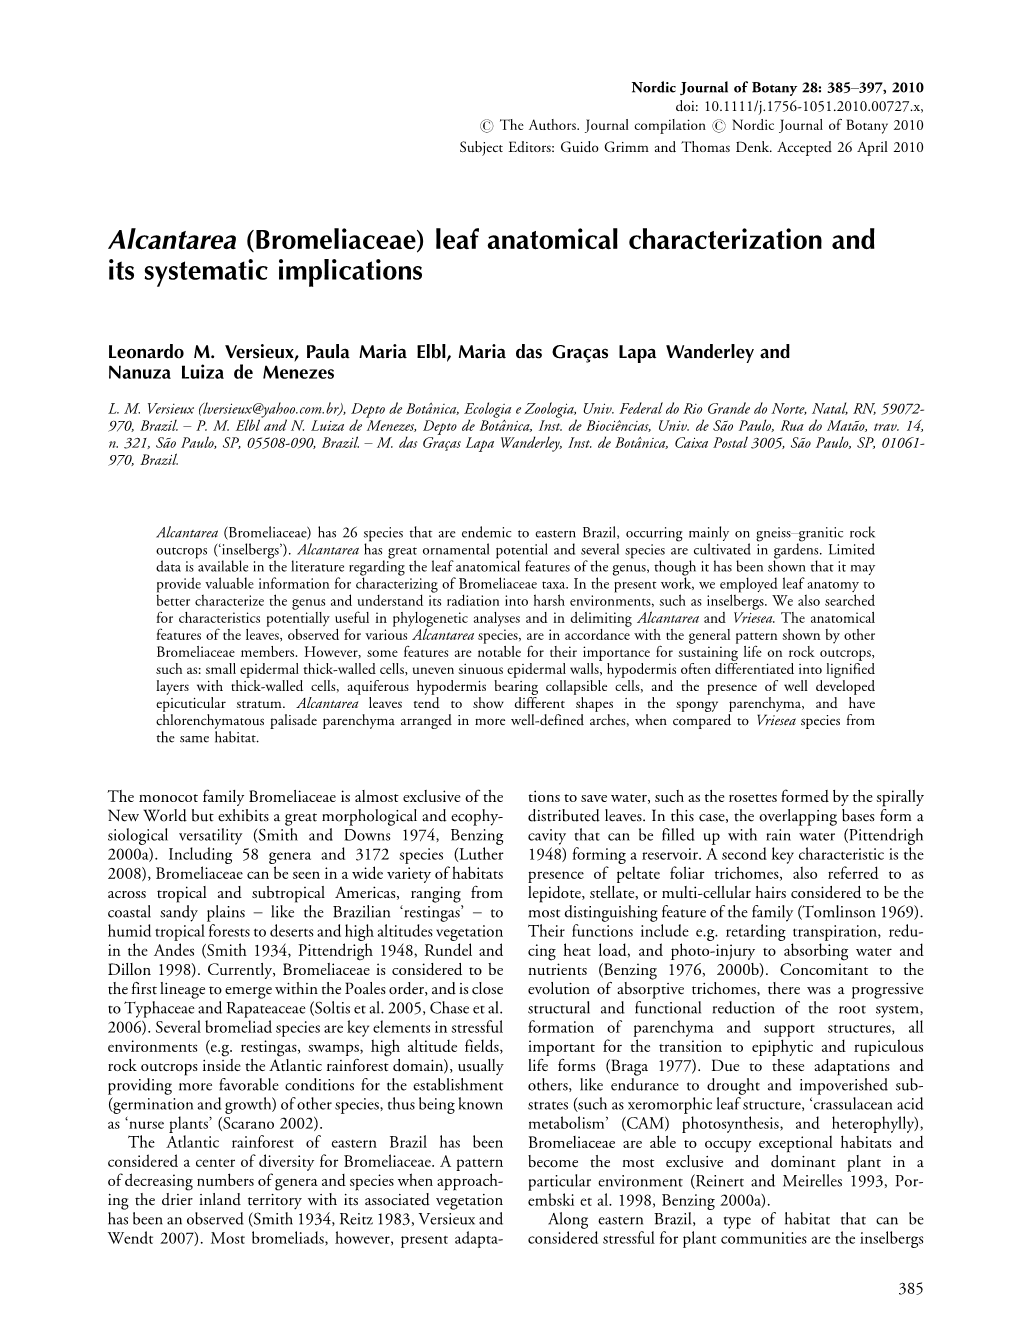 Alcantarea (Bromeliaceae) Leaf Anatomical Characterization and Its Systematic Implications